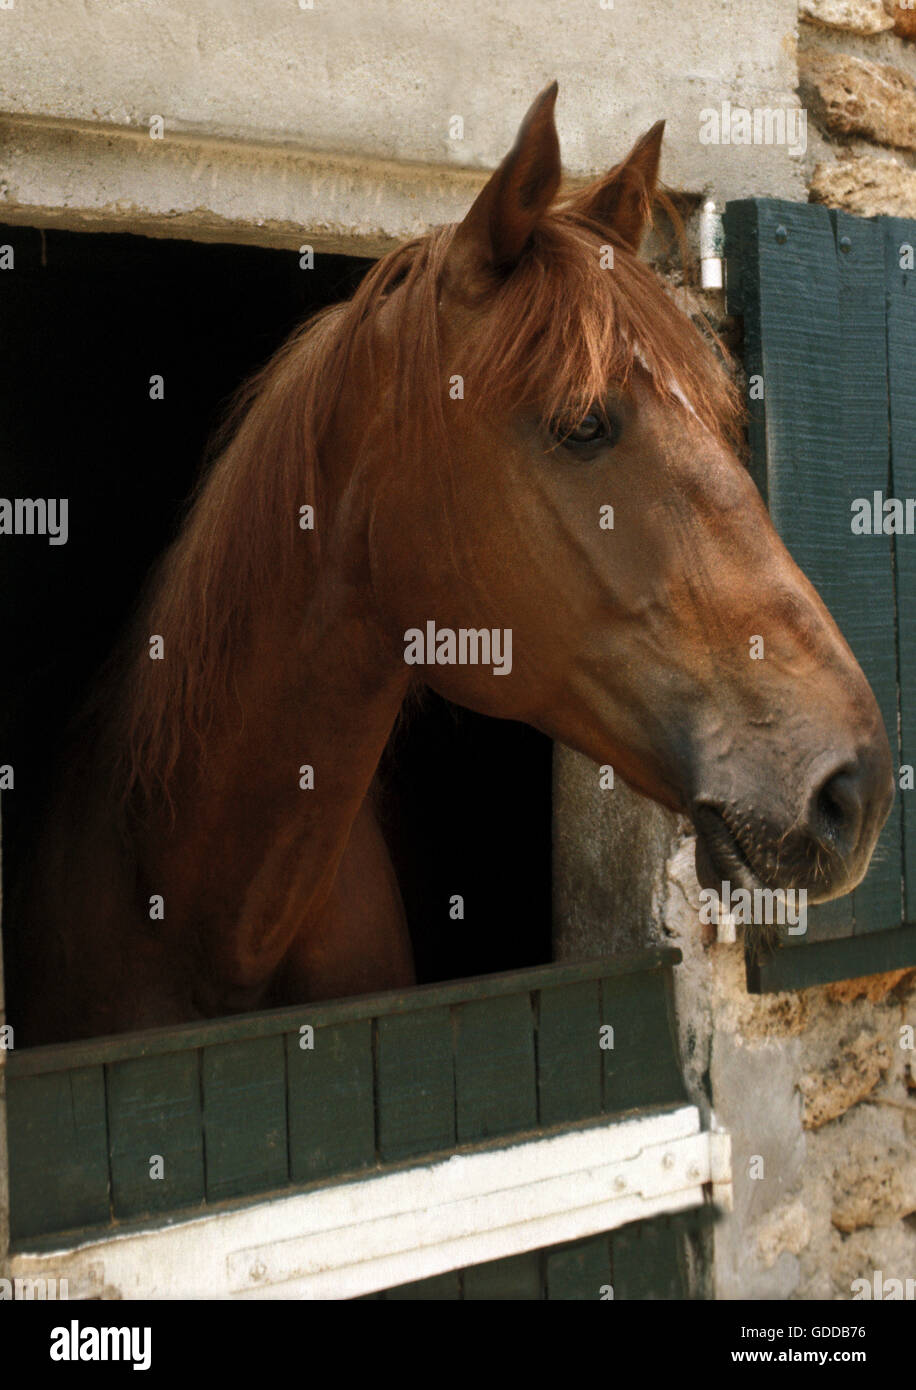 Portrait of Horse at Stable Stock Photo